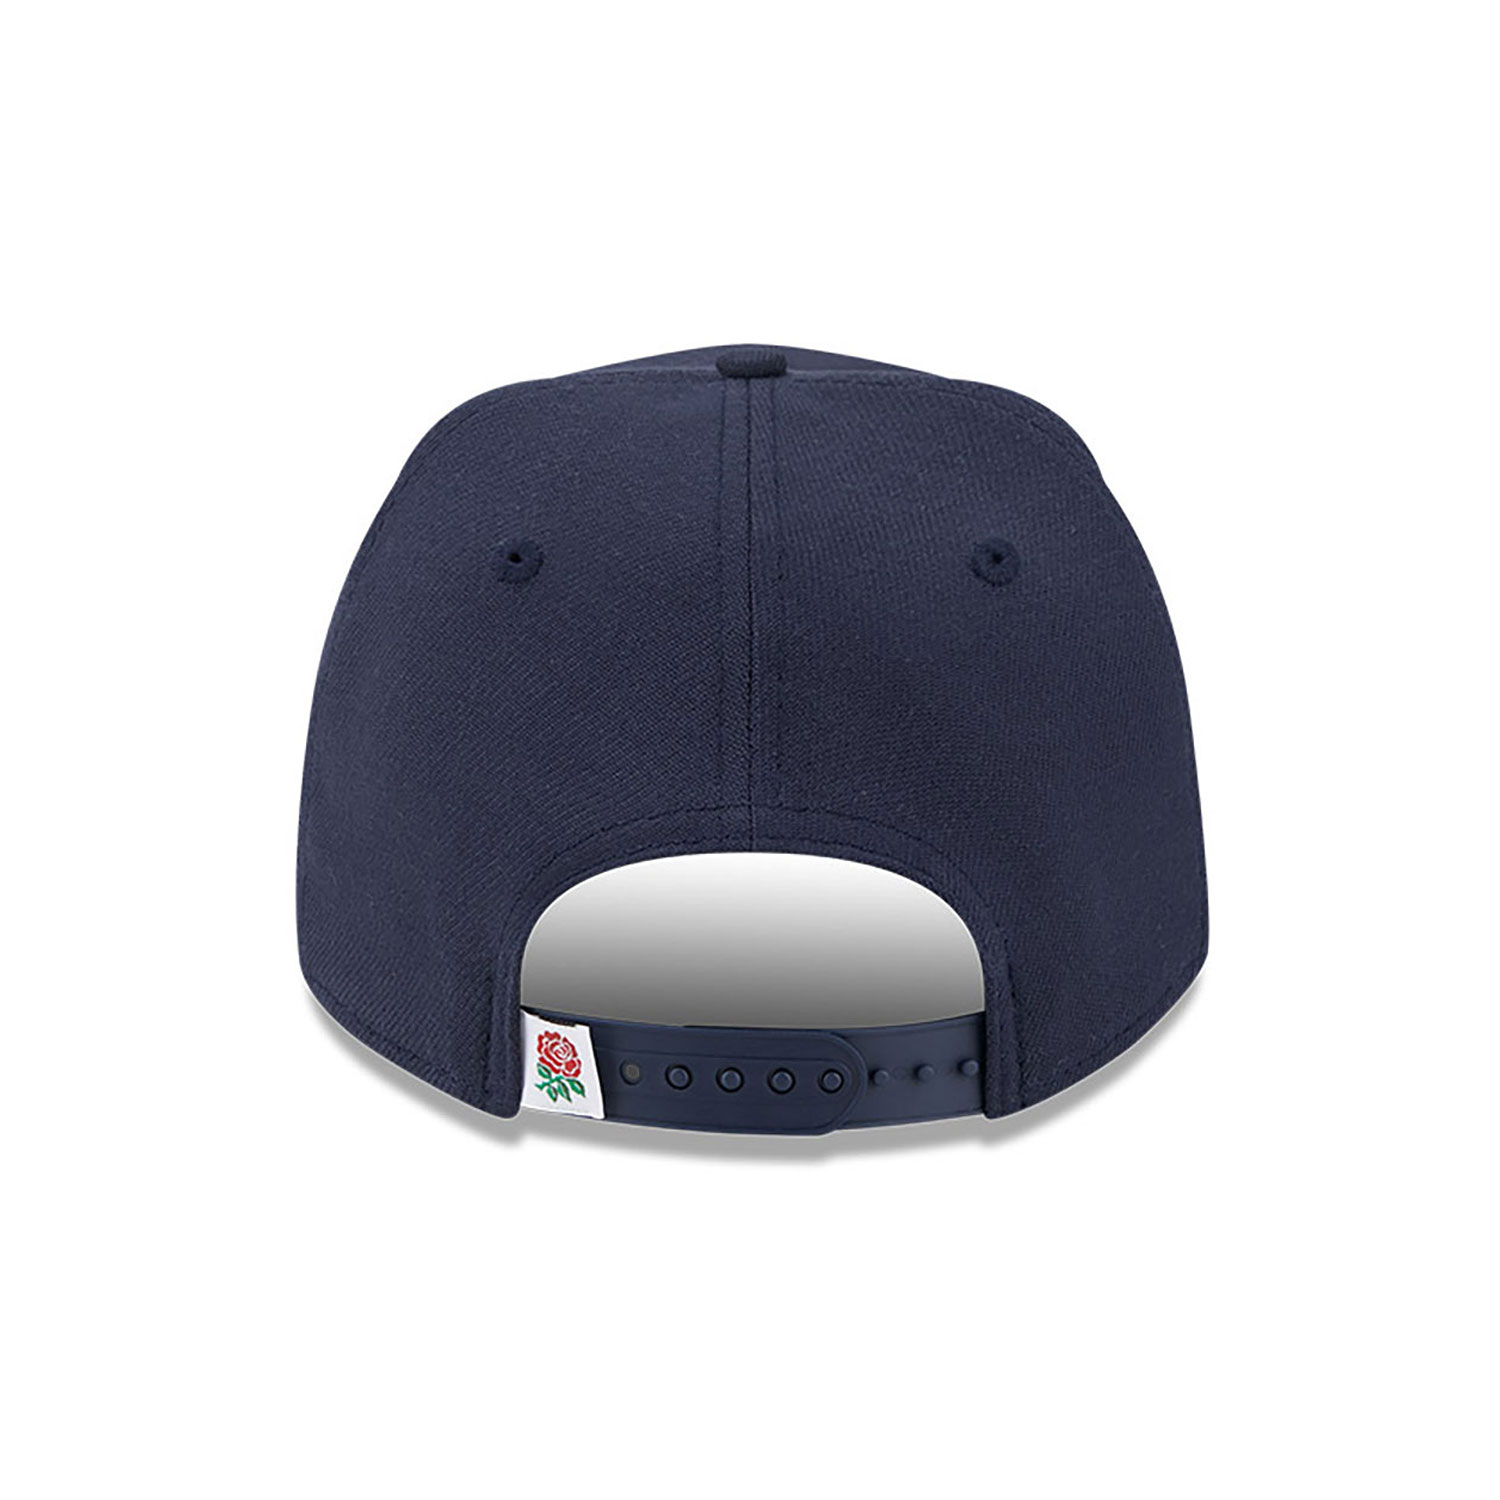 Angleterre Rugby Union Rose Navy Stretch Snap 9FIFTY Cap